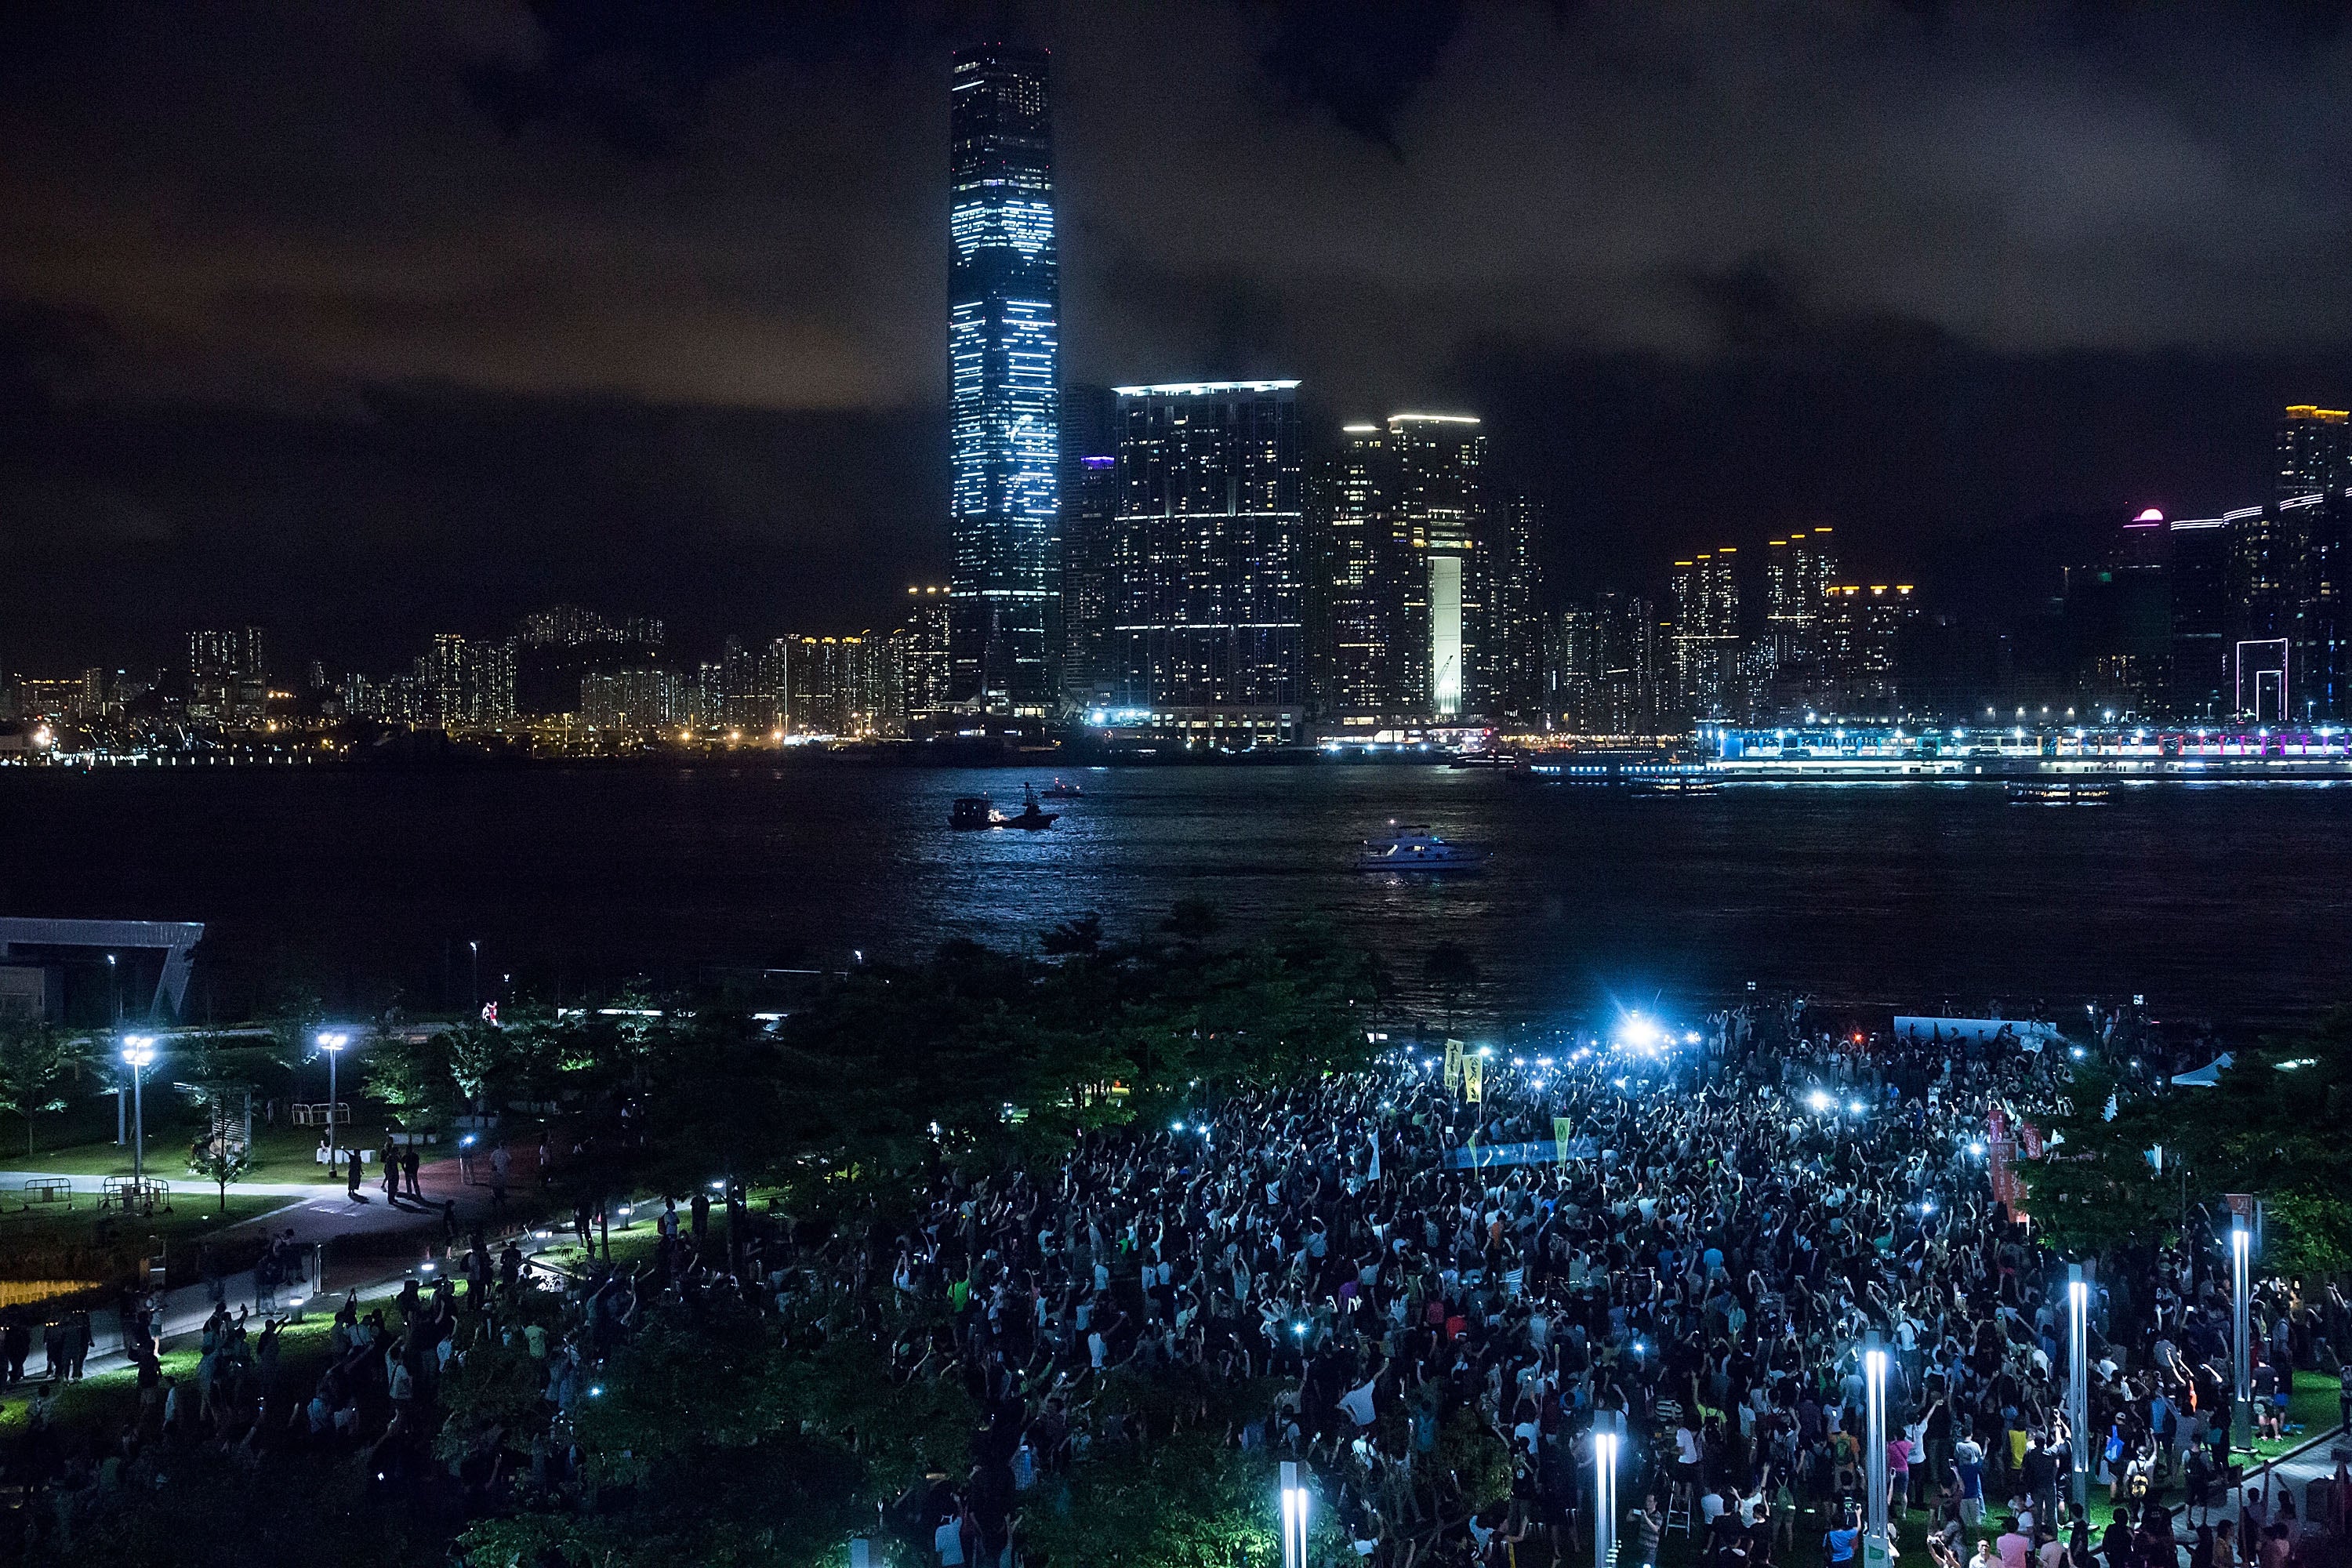 Protesters take part in a pro-democracy rally on 31 August 2014 in Hong Kong, China